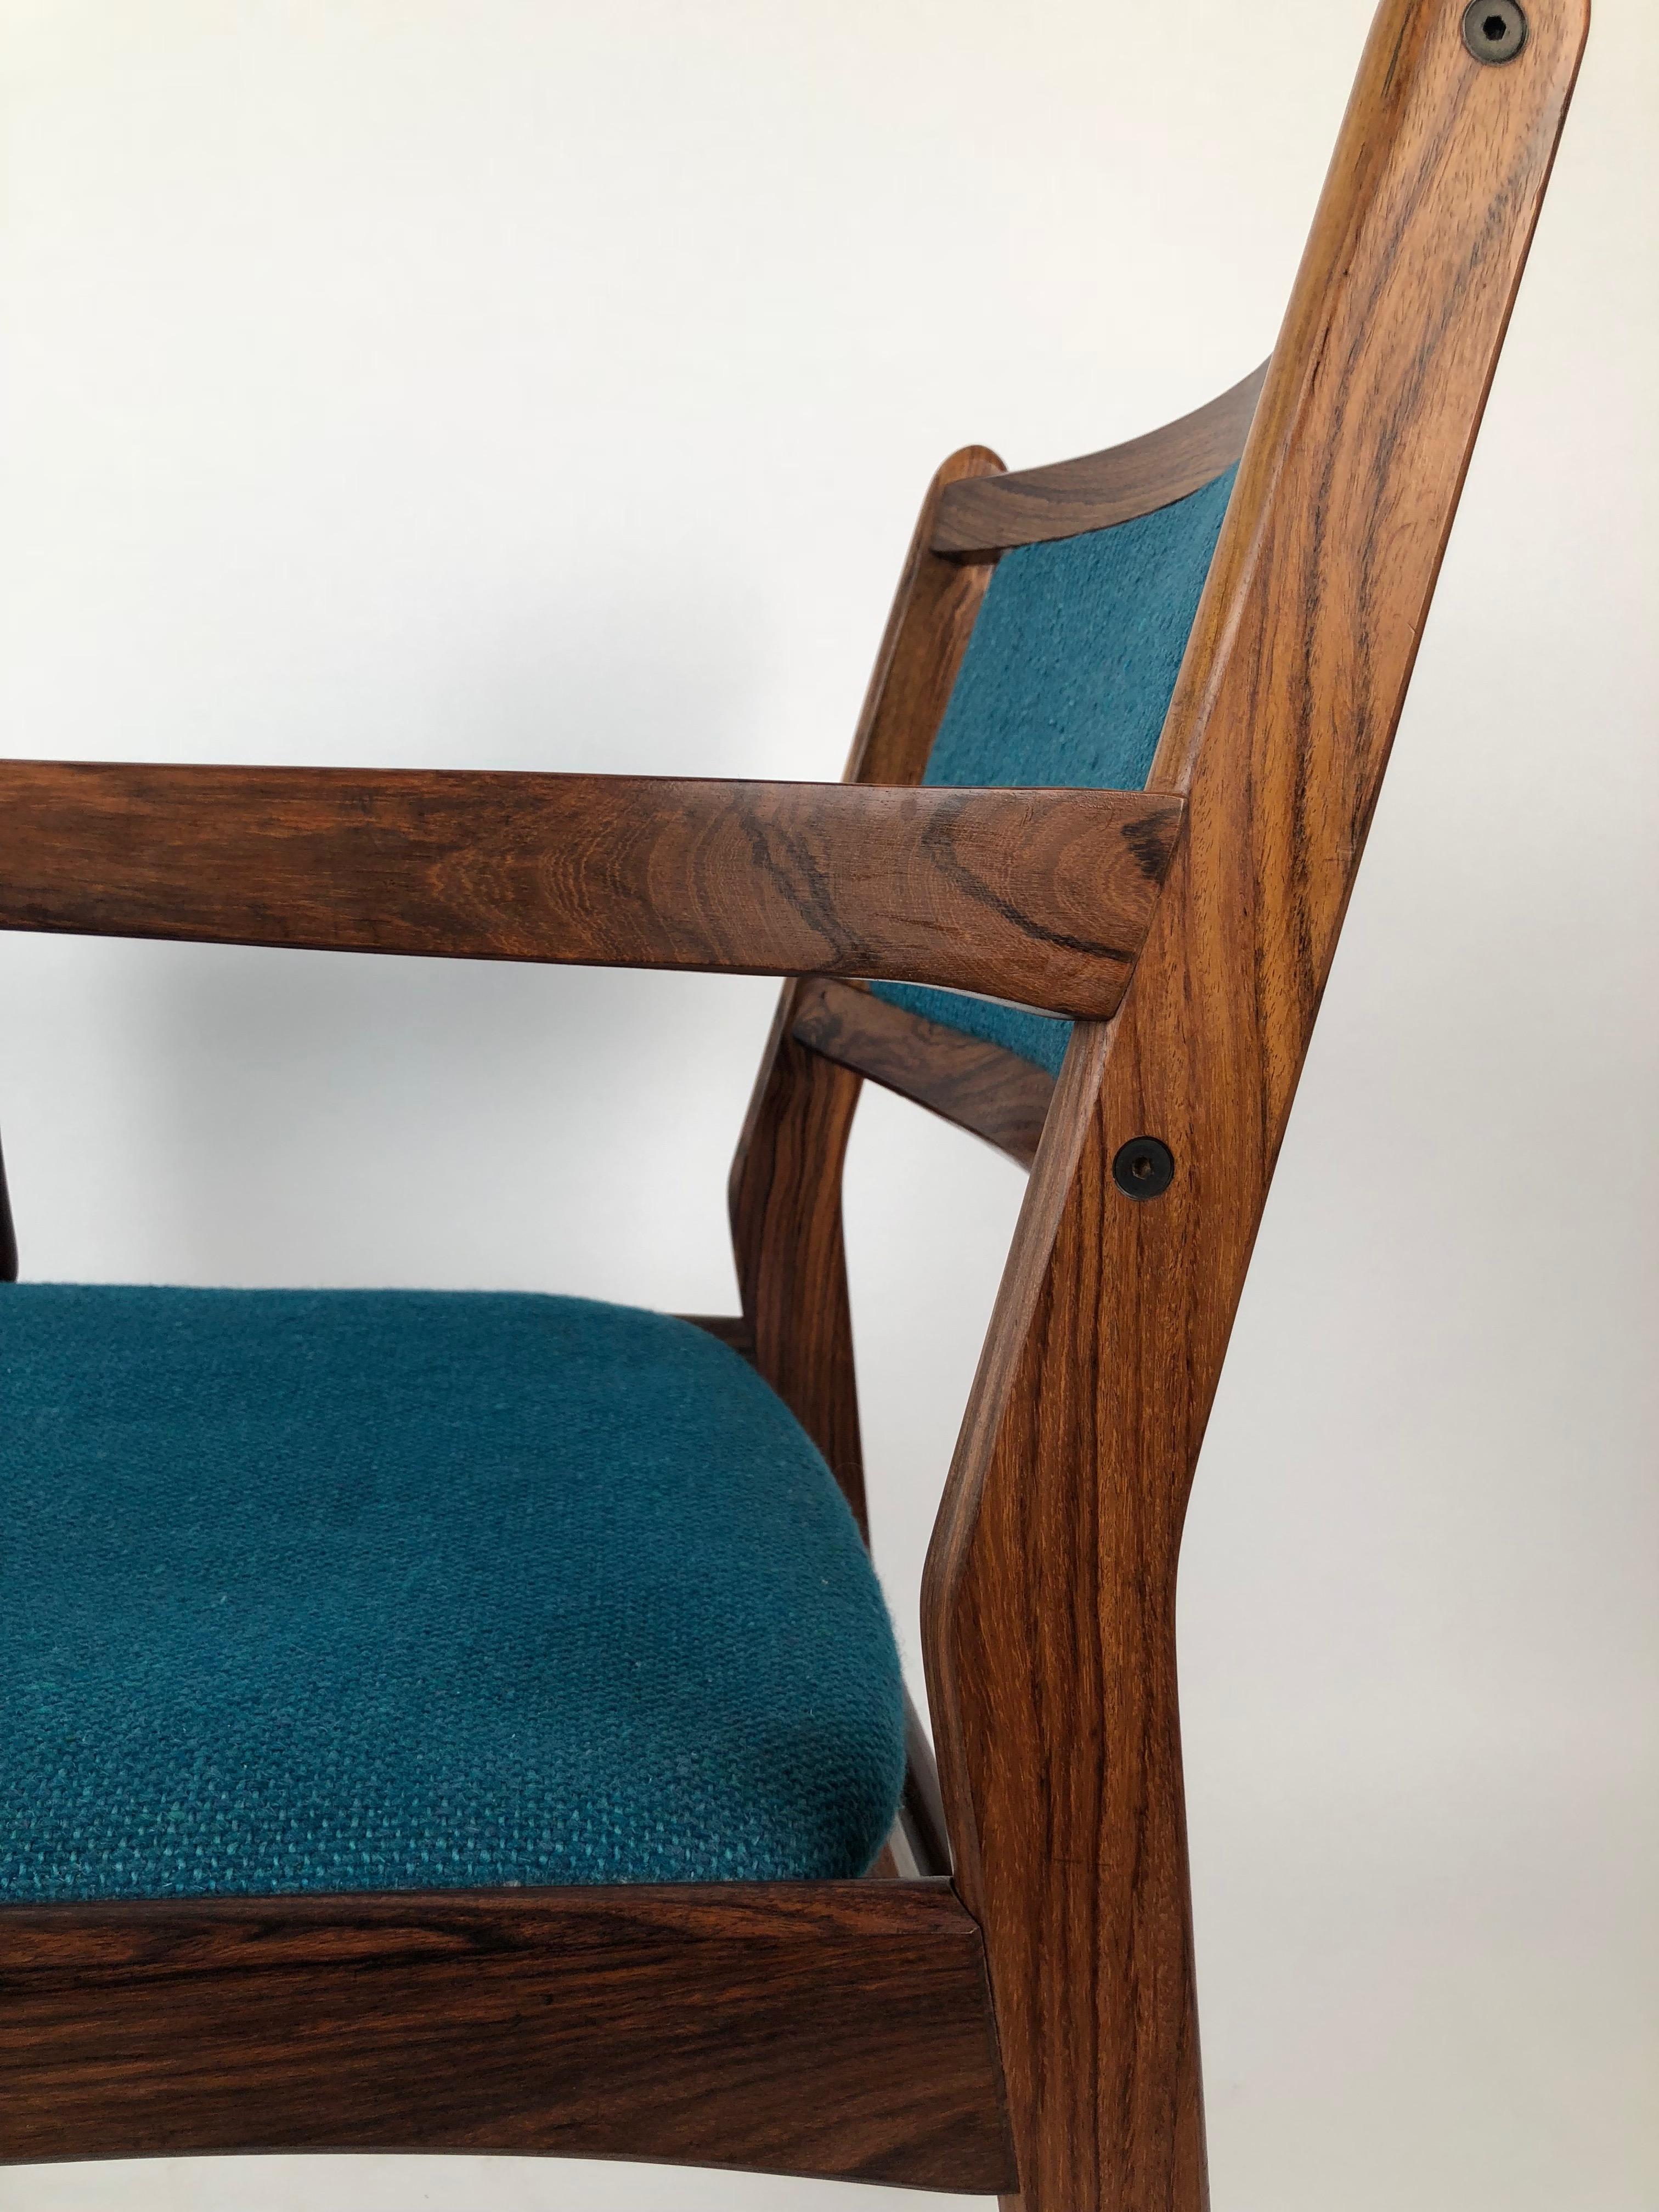 Scandinavian Set of Two Palisander Chairs with Turquoise Fabric from the 1960s For Sale